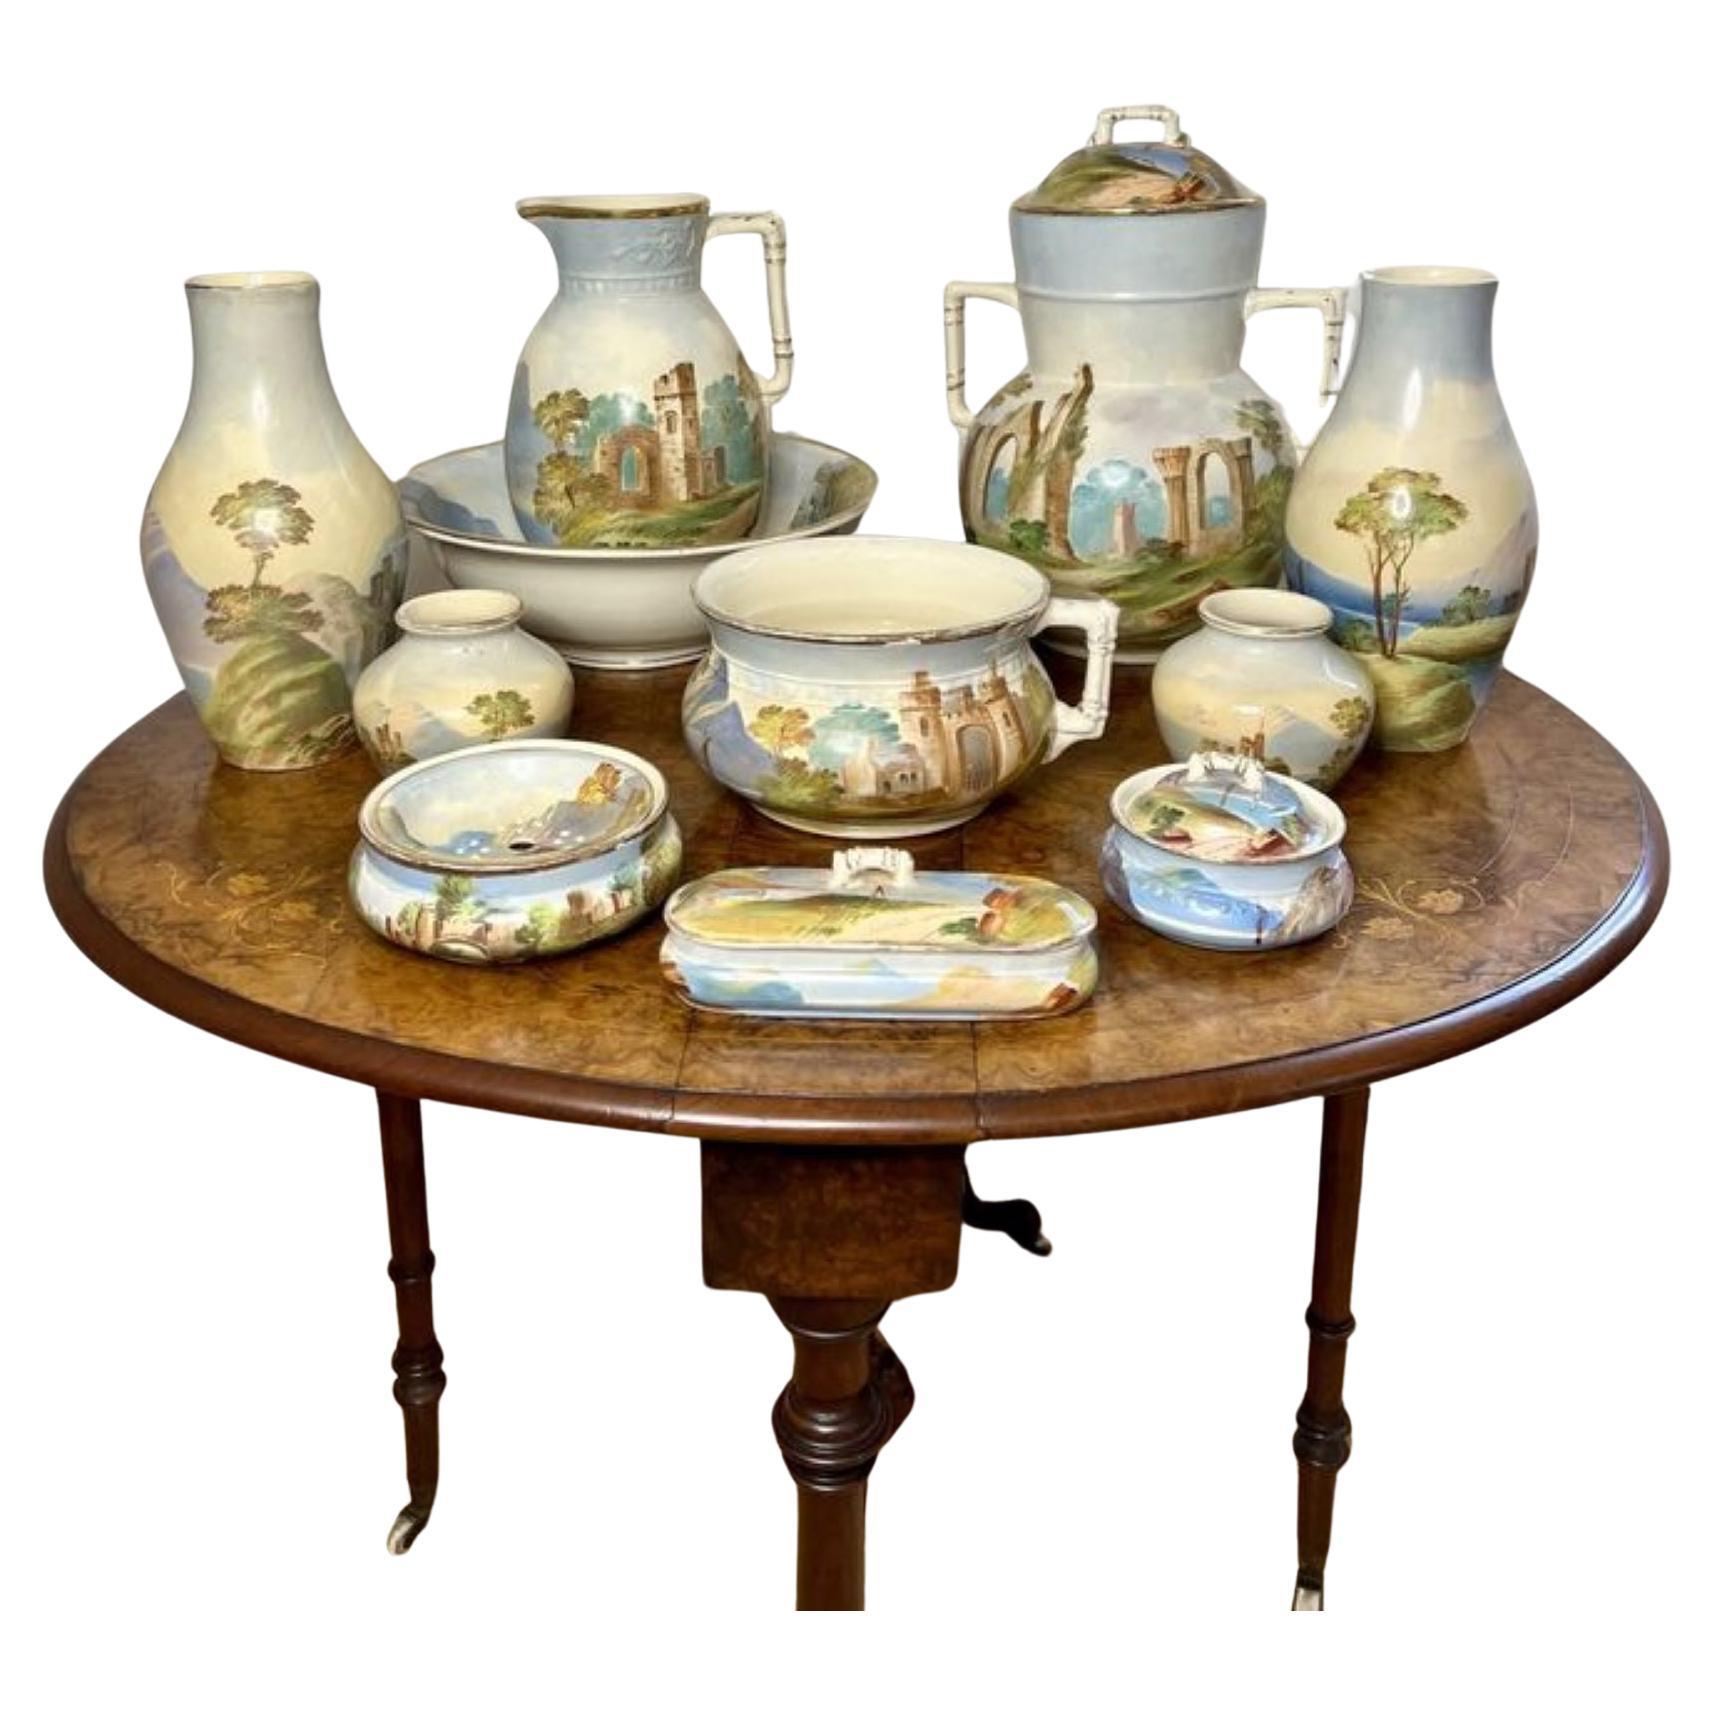 Outstanding quality antique Edwardian wash set  For Sale